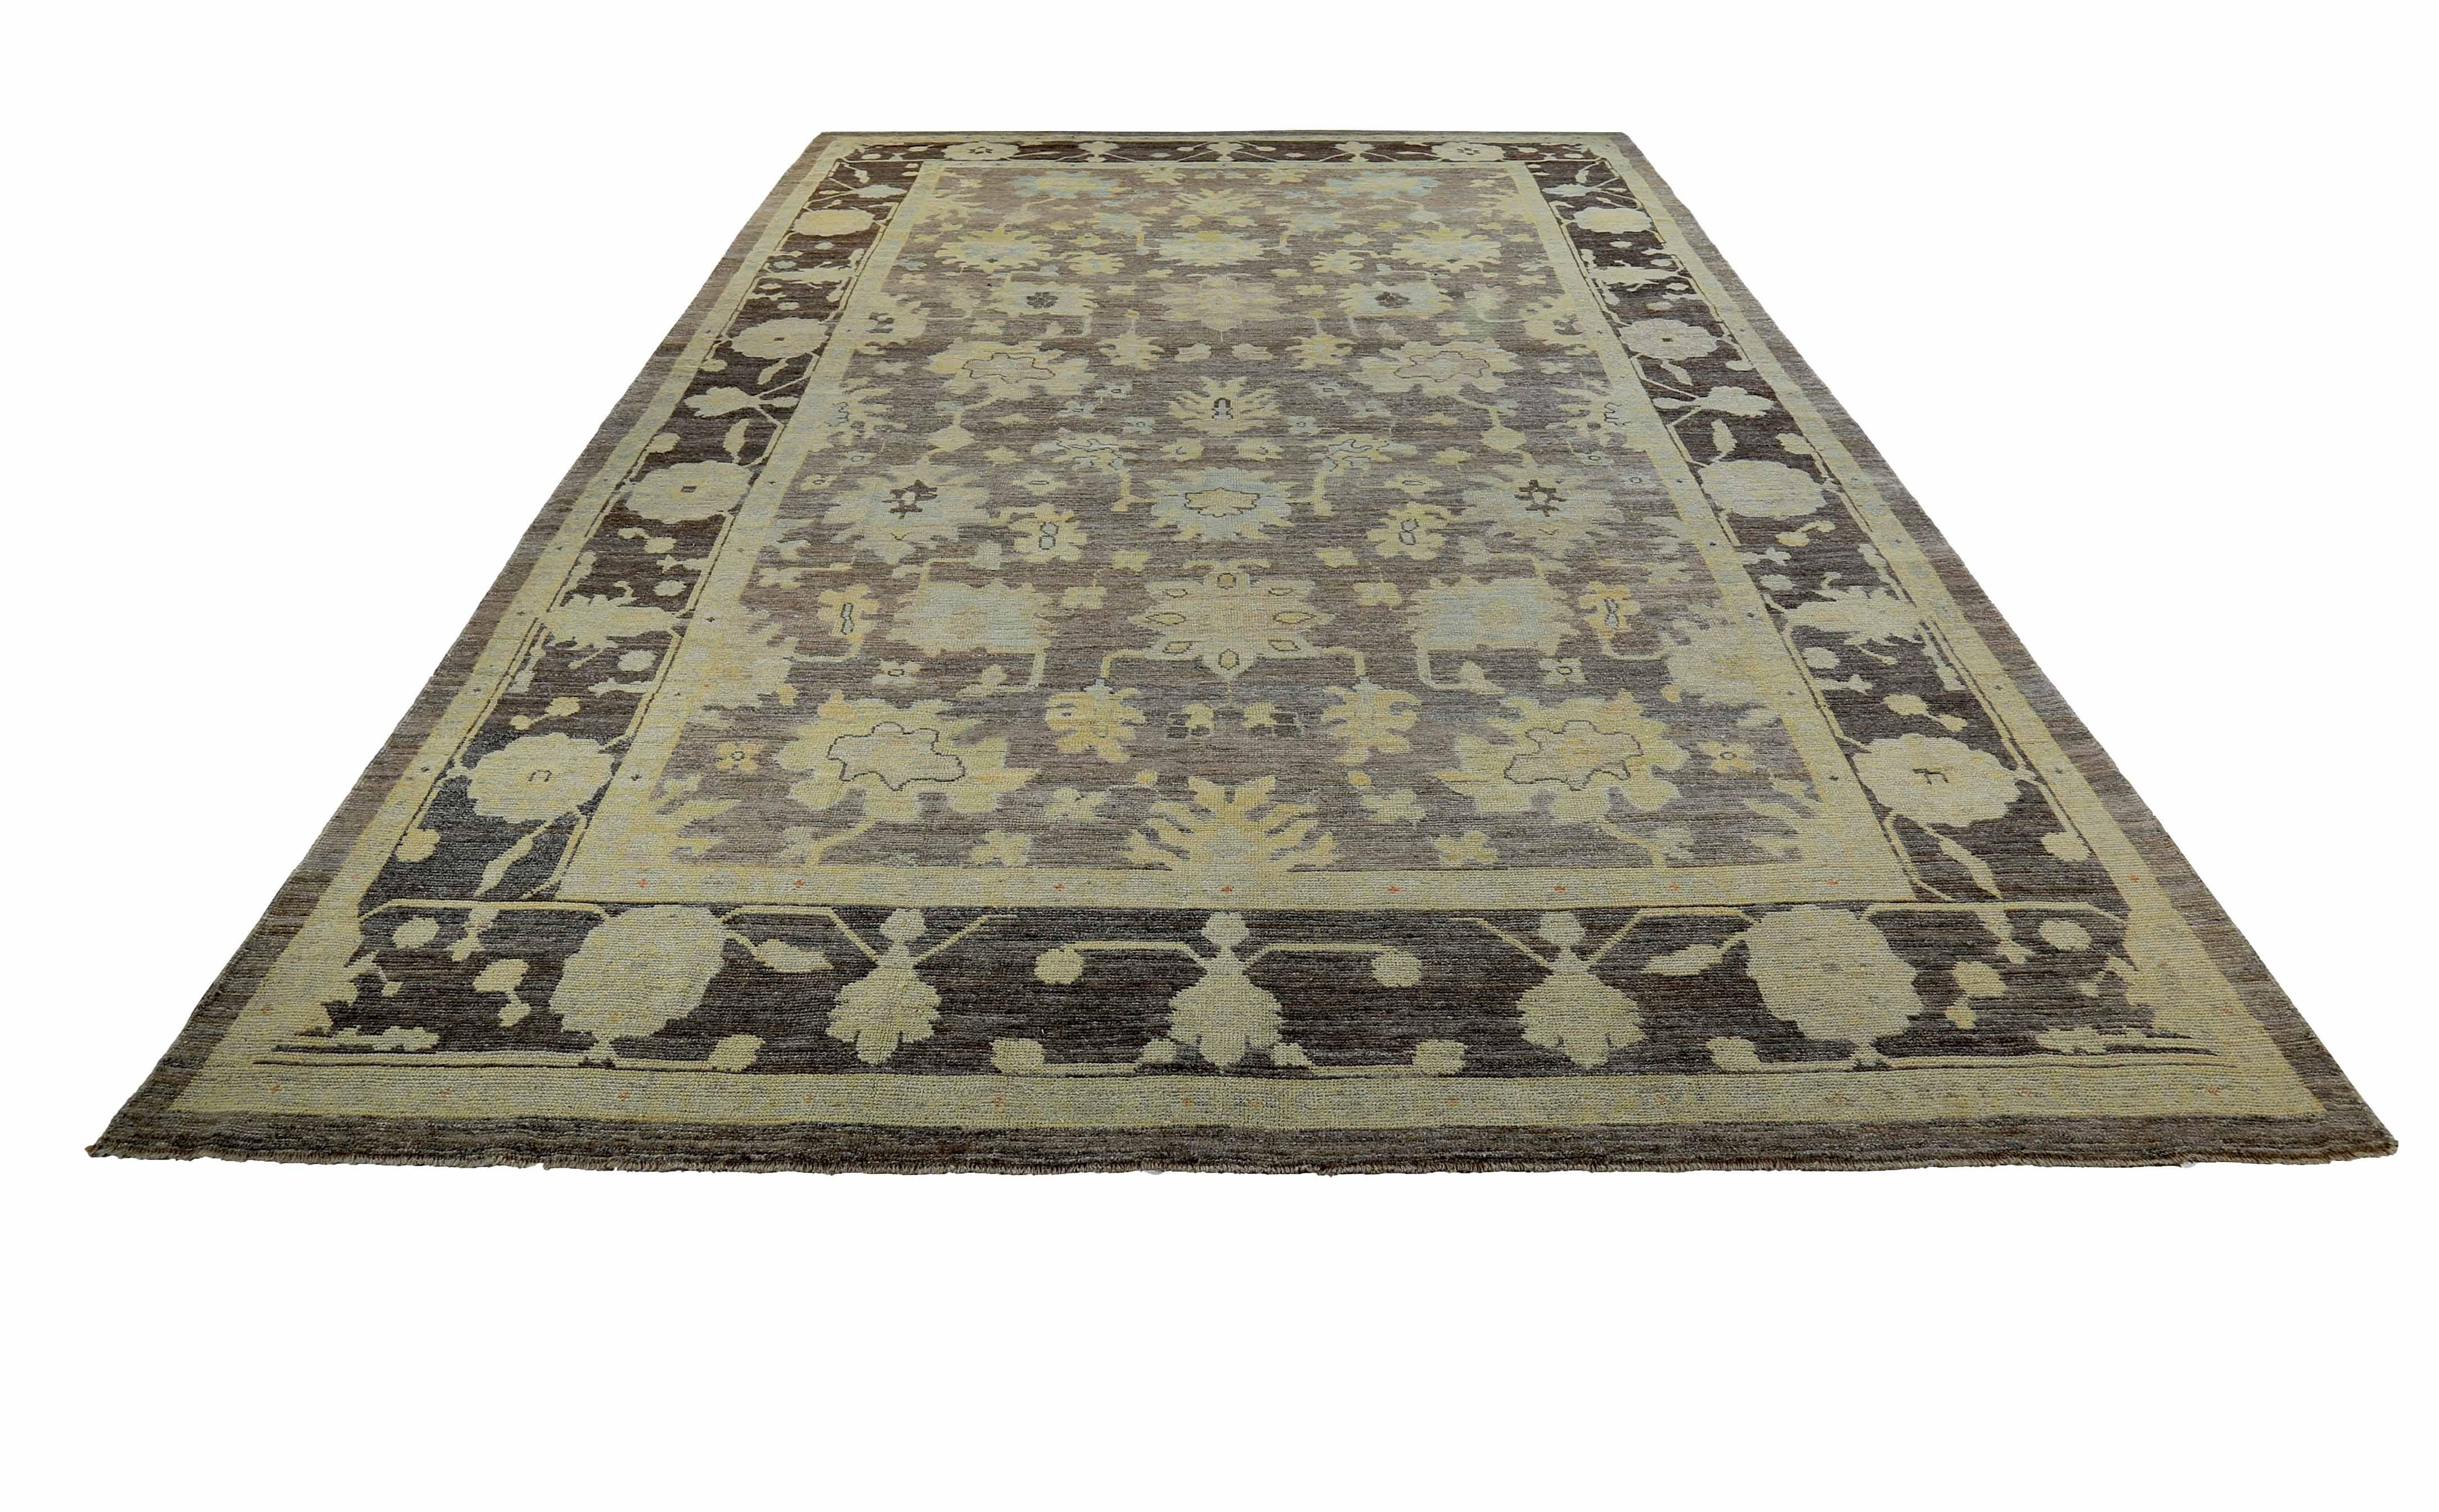 New Turkish rug made of handwoven sheep’s wool of the finest quality. It’s colored with organic vegetable dyes that are certified safe for humans and pets alike. It features ivory and blue floral details on an elegant brown field. Flower patterns